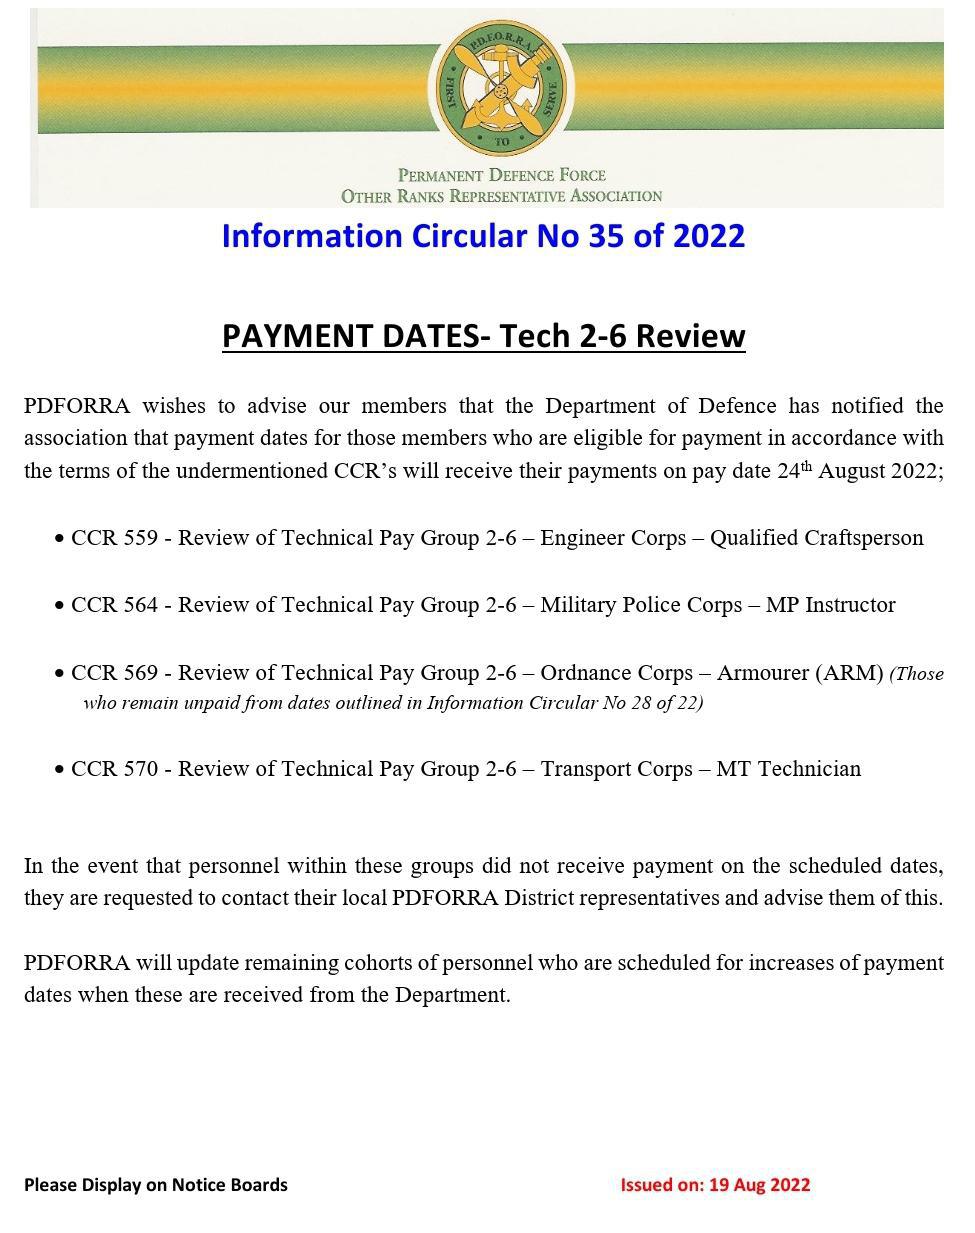 Information Circular No 35 of 22 - Payment Dates Tech 2 to 6 Review